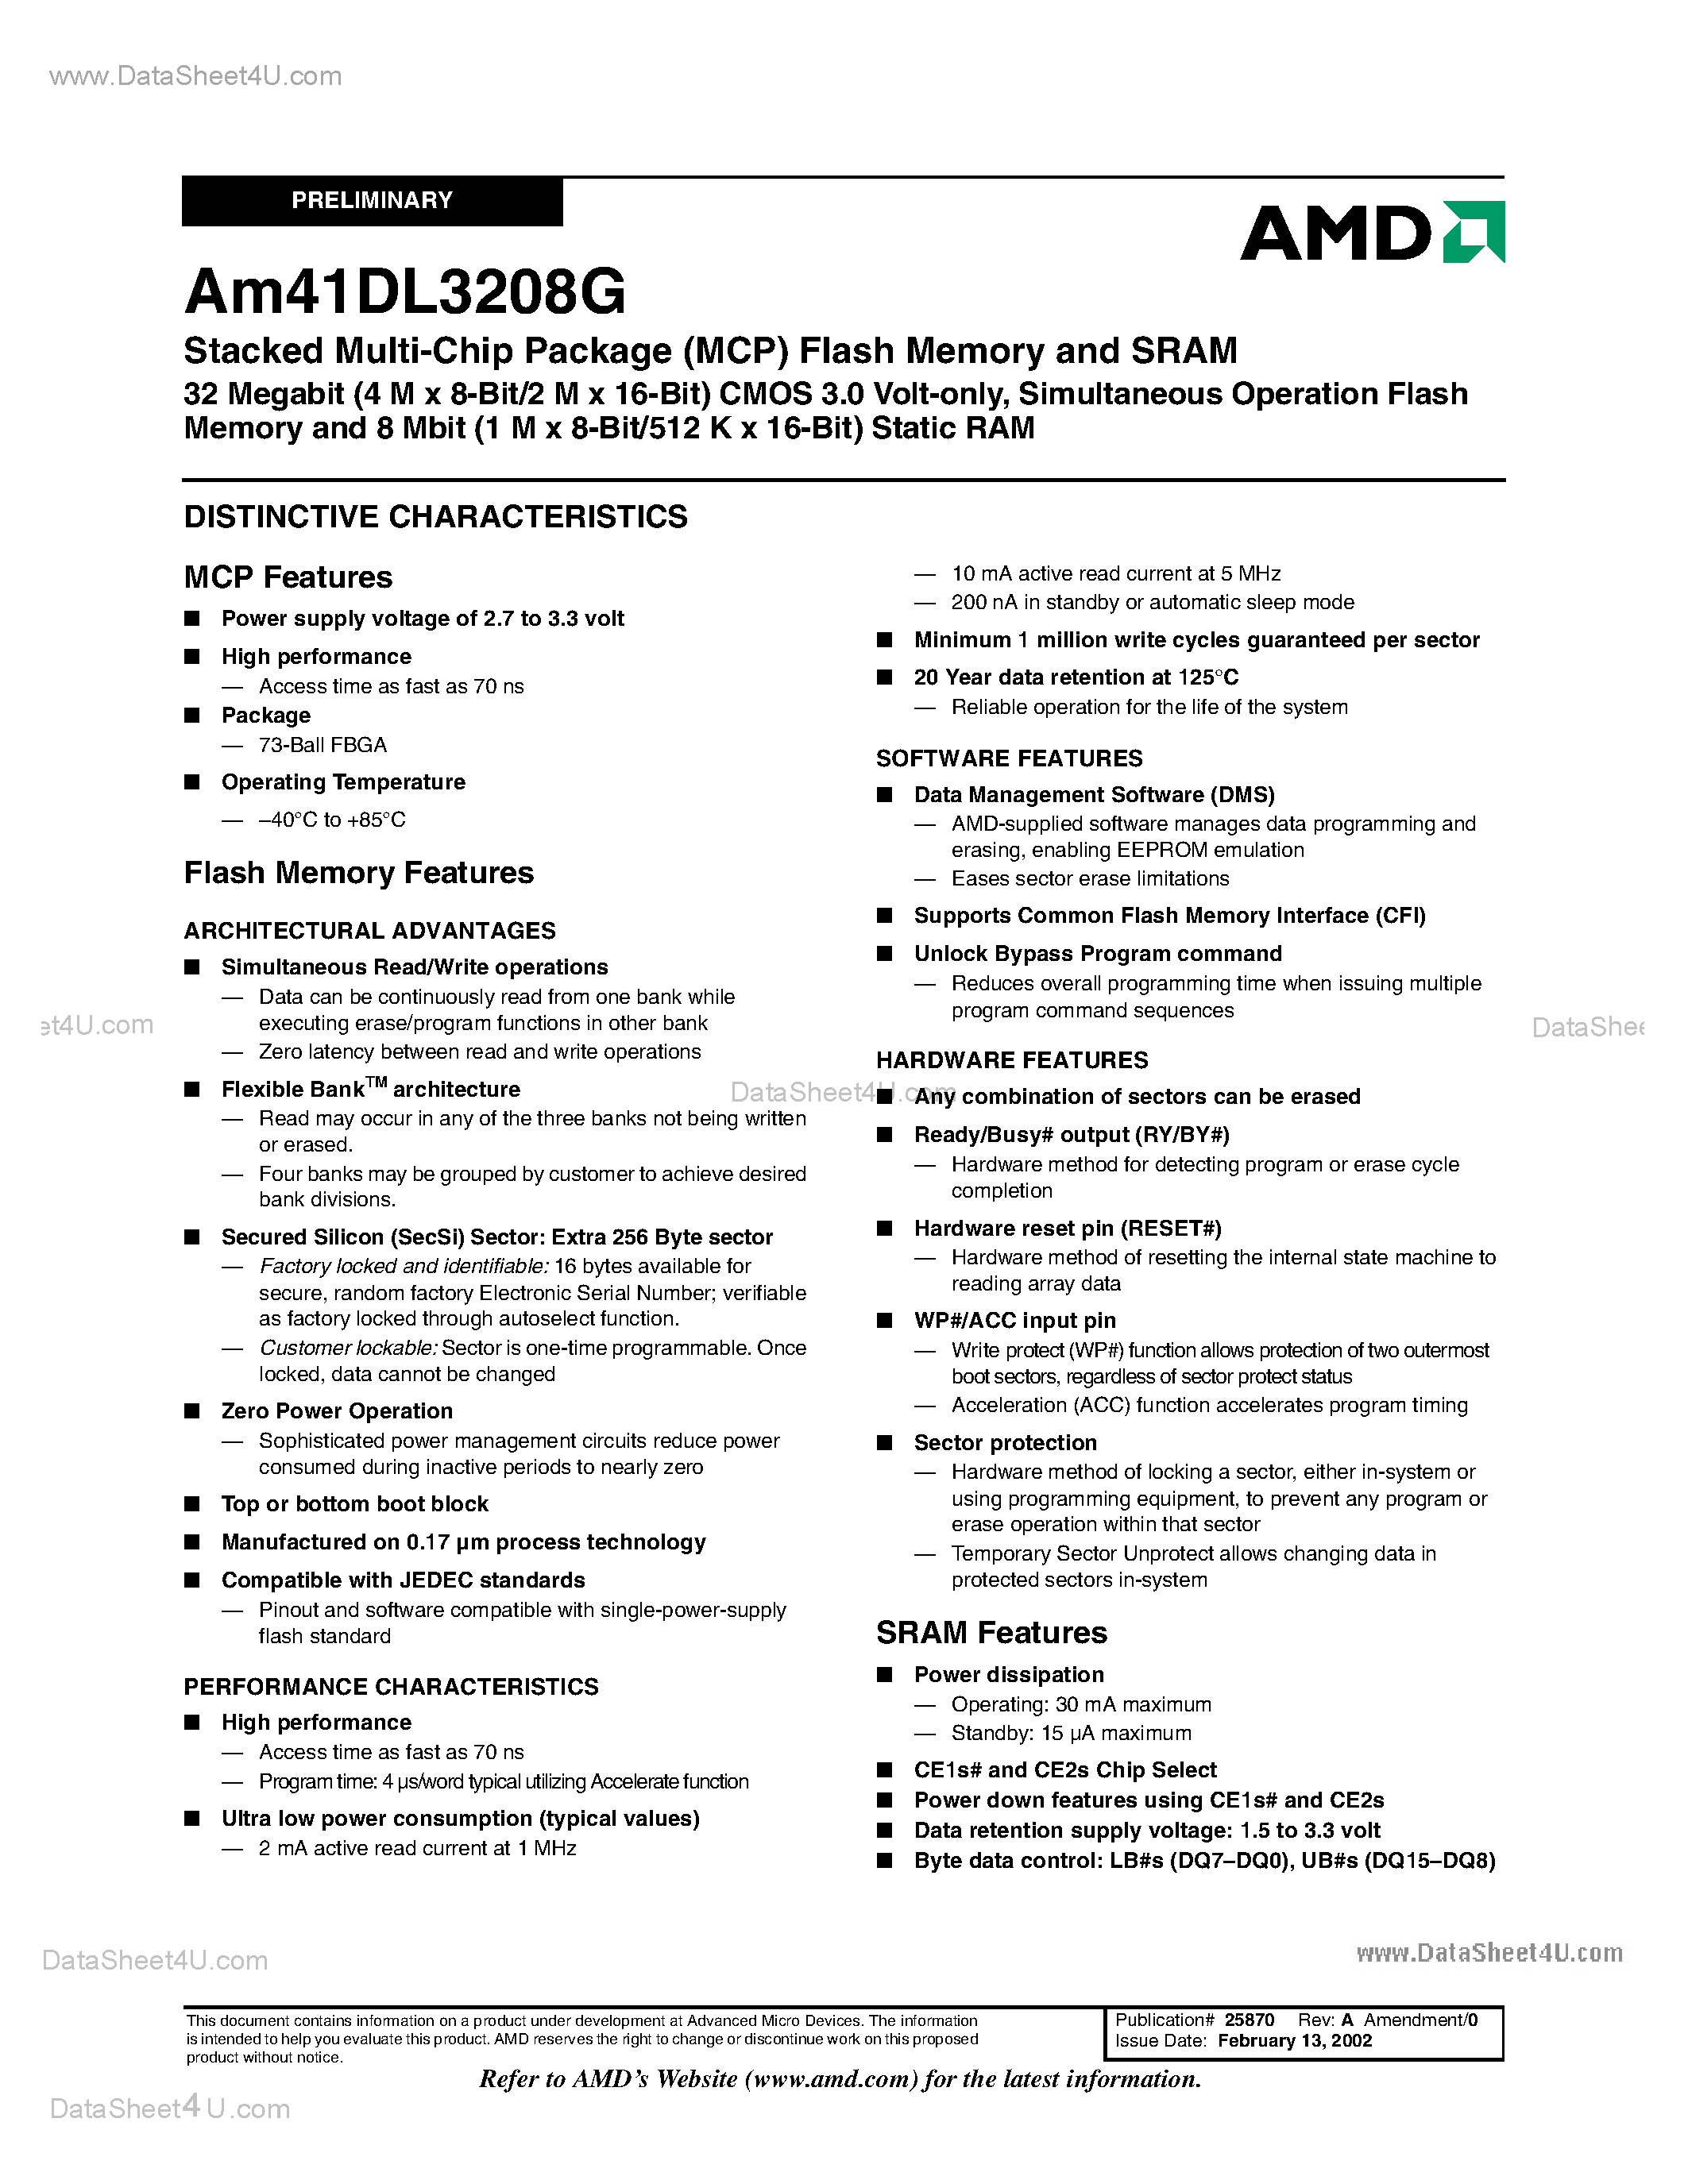 Datasheet AM41DL3208G - Stacked Multi-Chip Package (MCP) Flash Memory and SRAM page 2